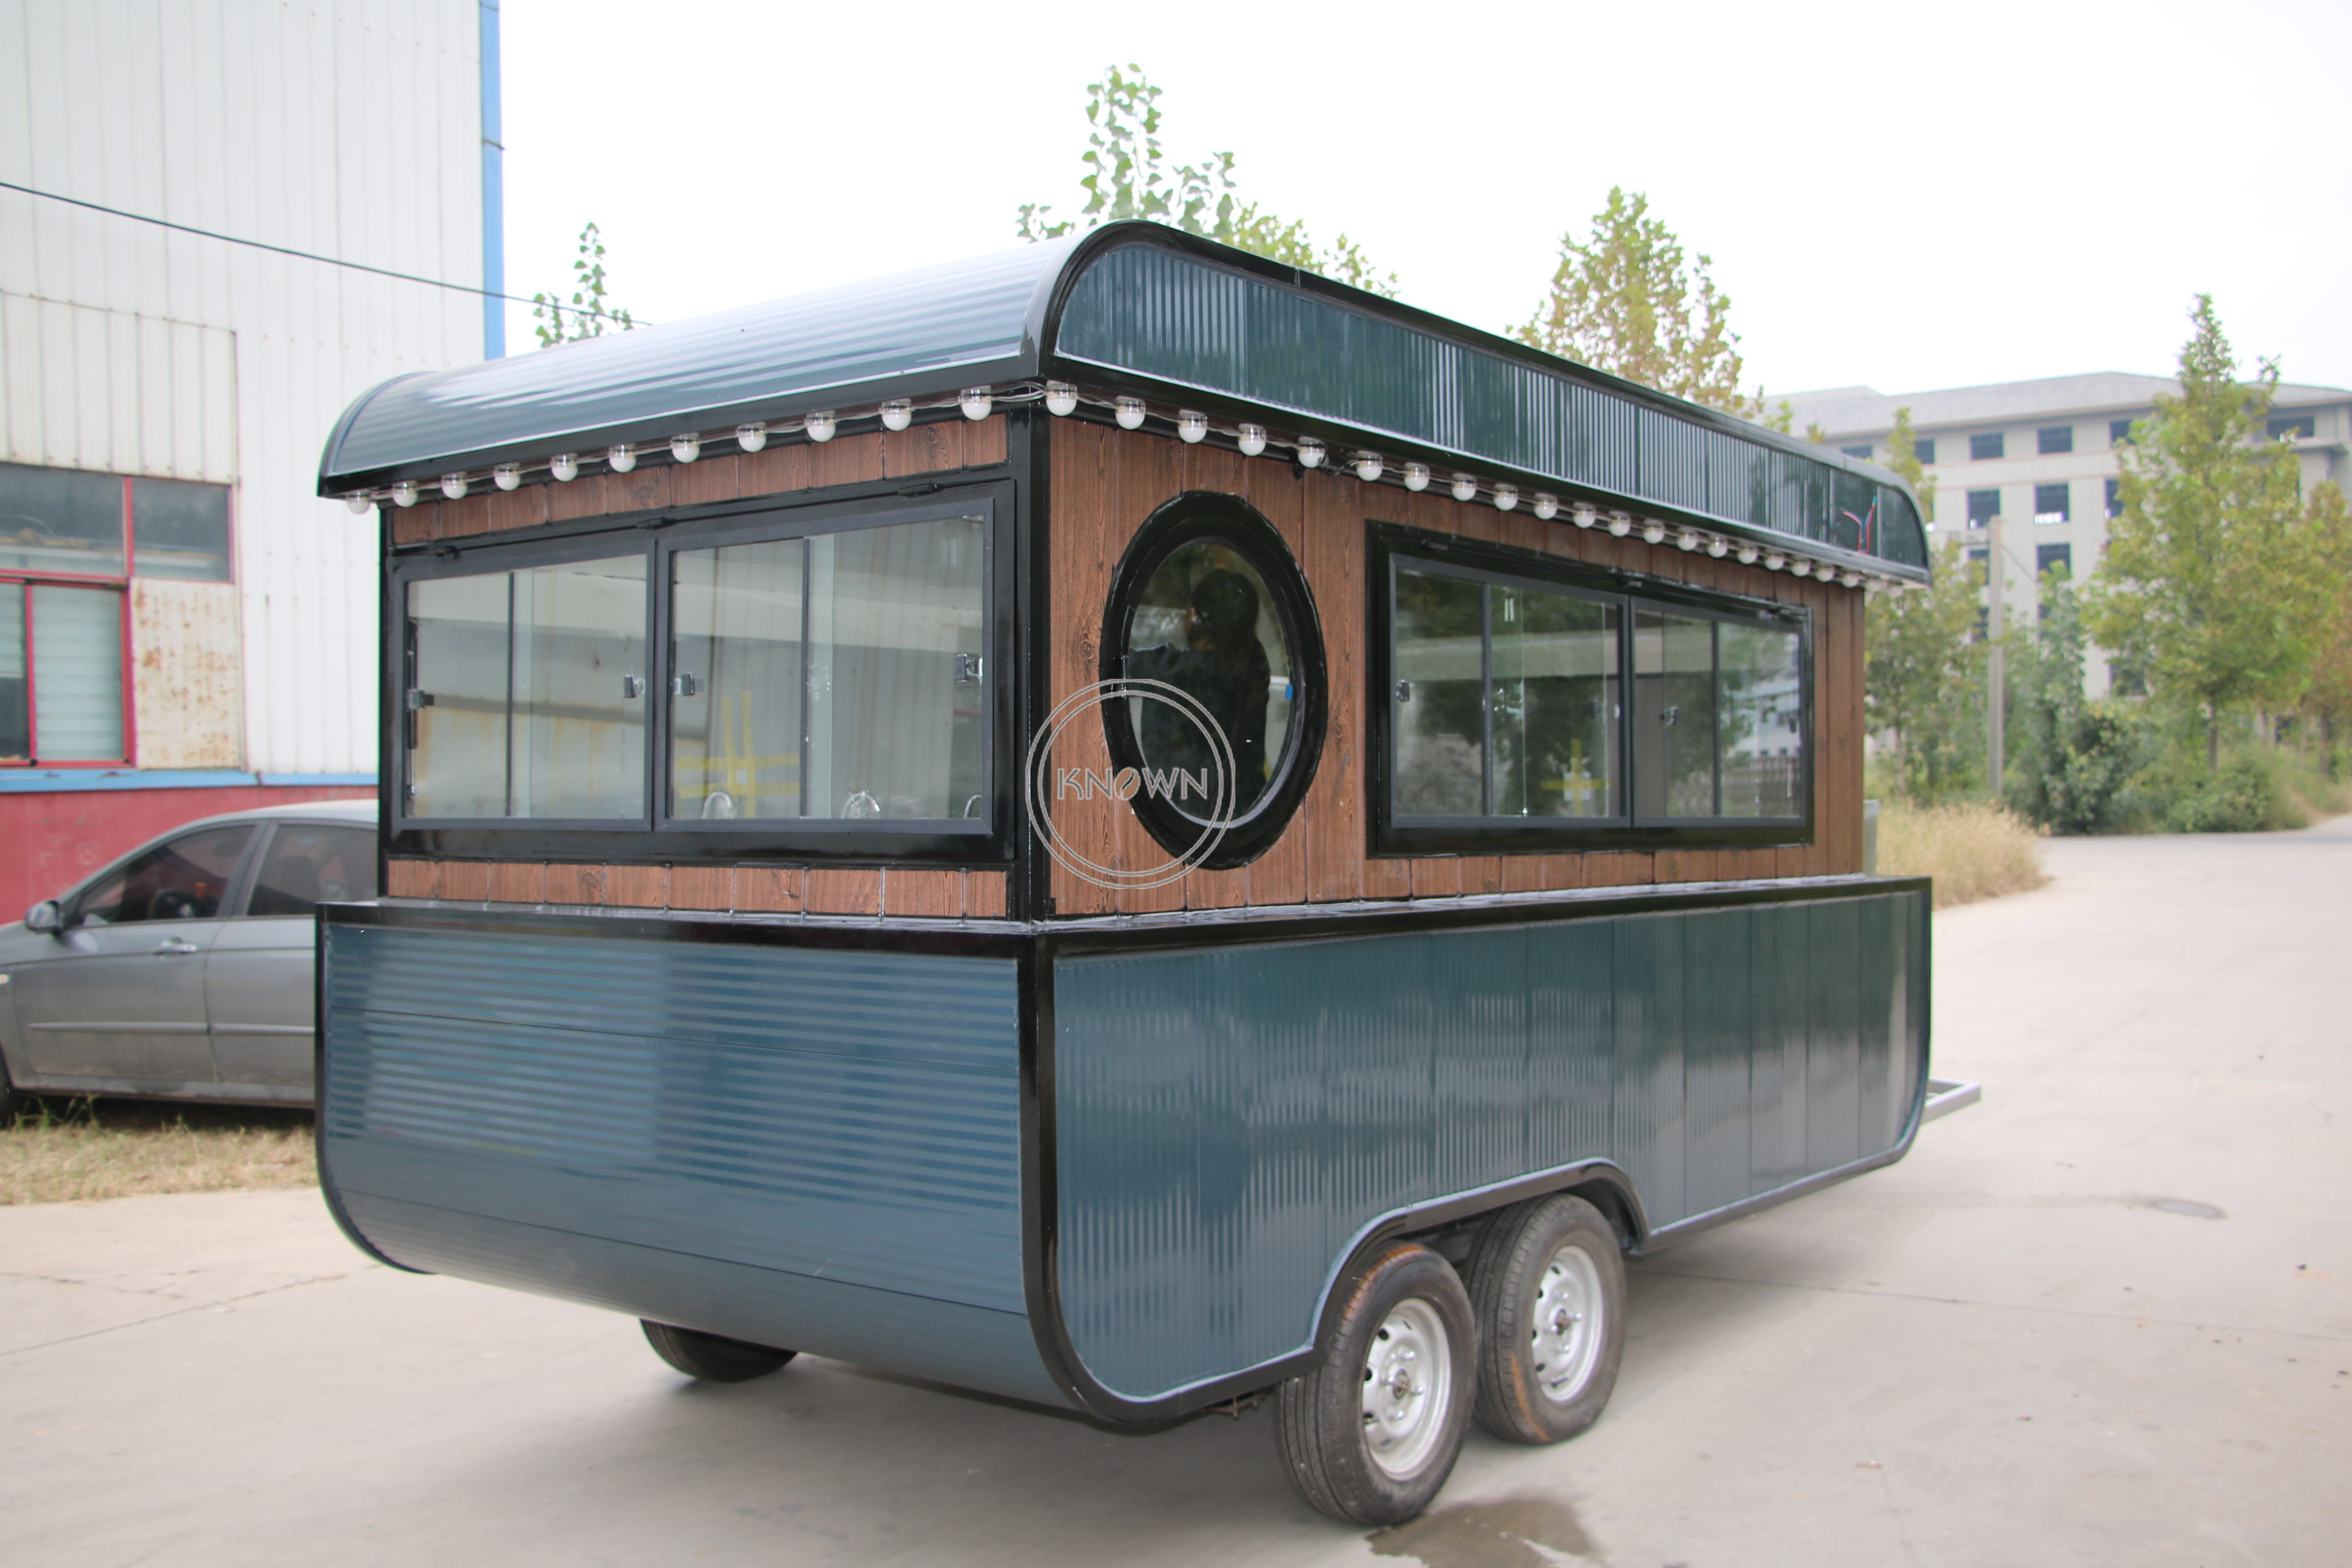 Mobile Boat Shape Food Trailer support Customization Outdoor Coffee Food Truck Cart for Sale